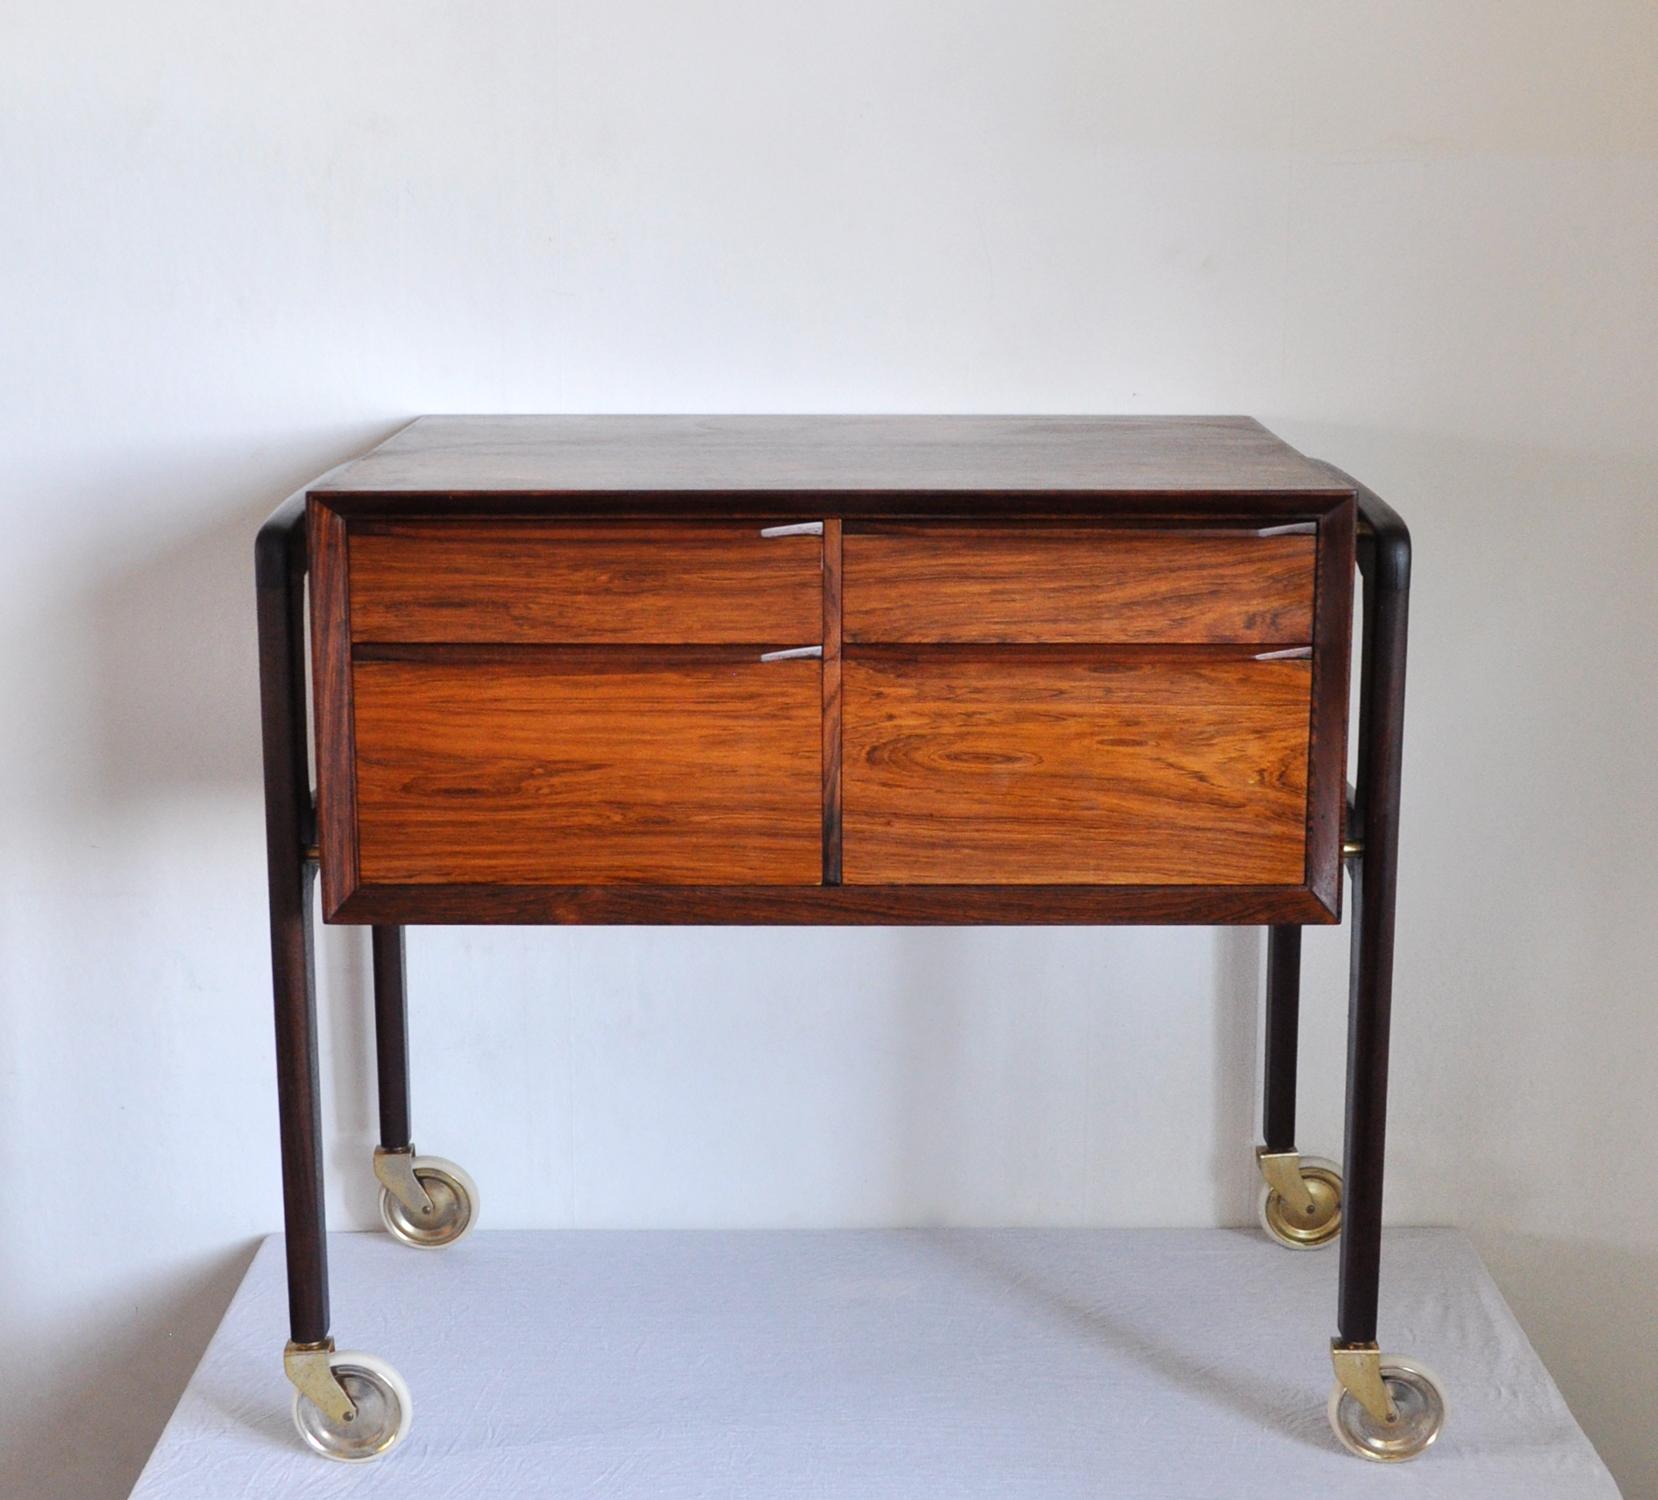 Danish cabinetmaker rosewood sewing trolley, 1950s, Denmark. Nicely made with four drawers and spool holders. Fine craftsmanship details, brass details and original castors.
Can be used as a side or occasional table. The casters let it roll